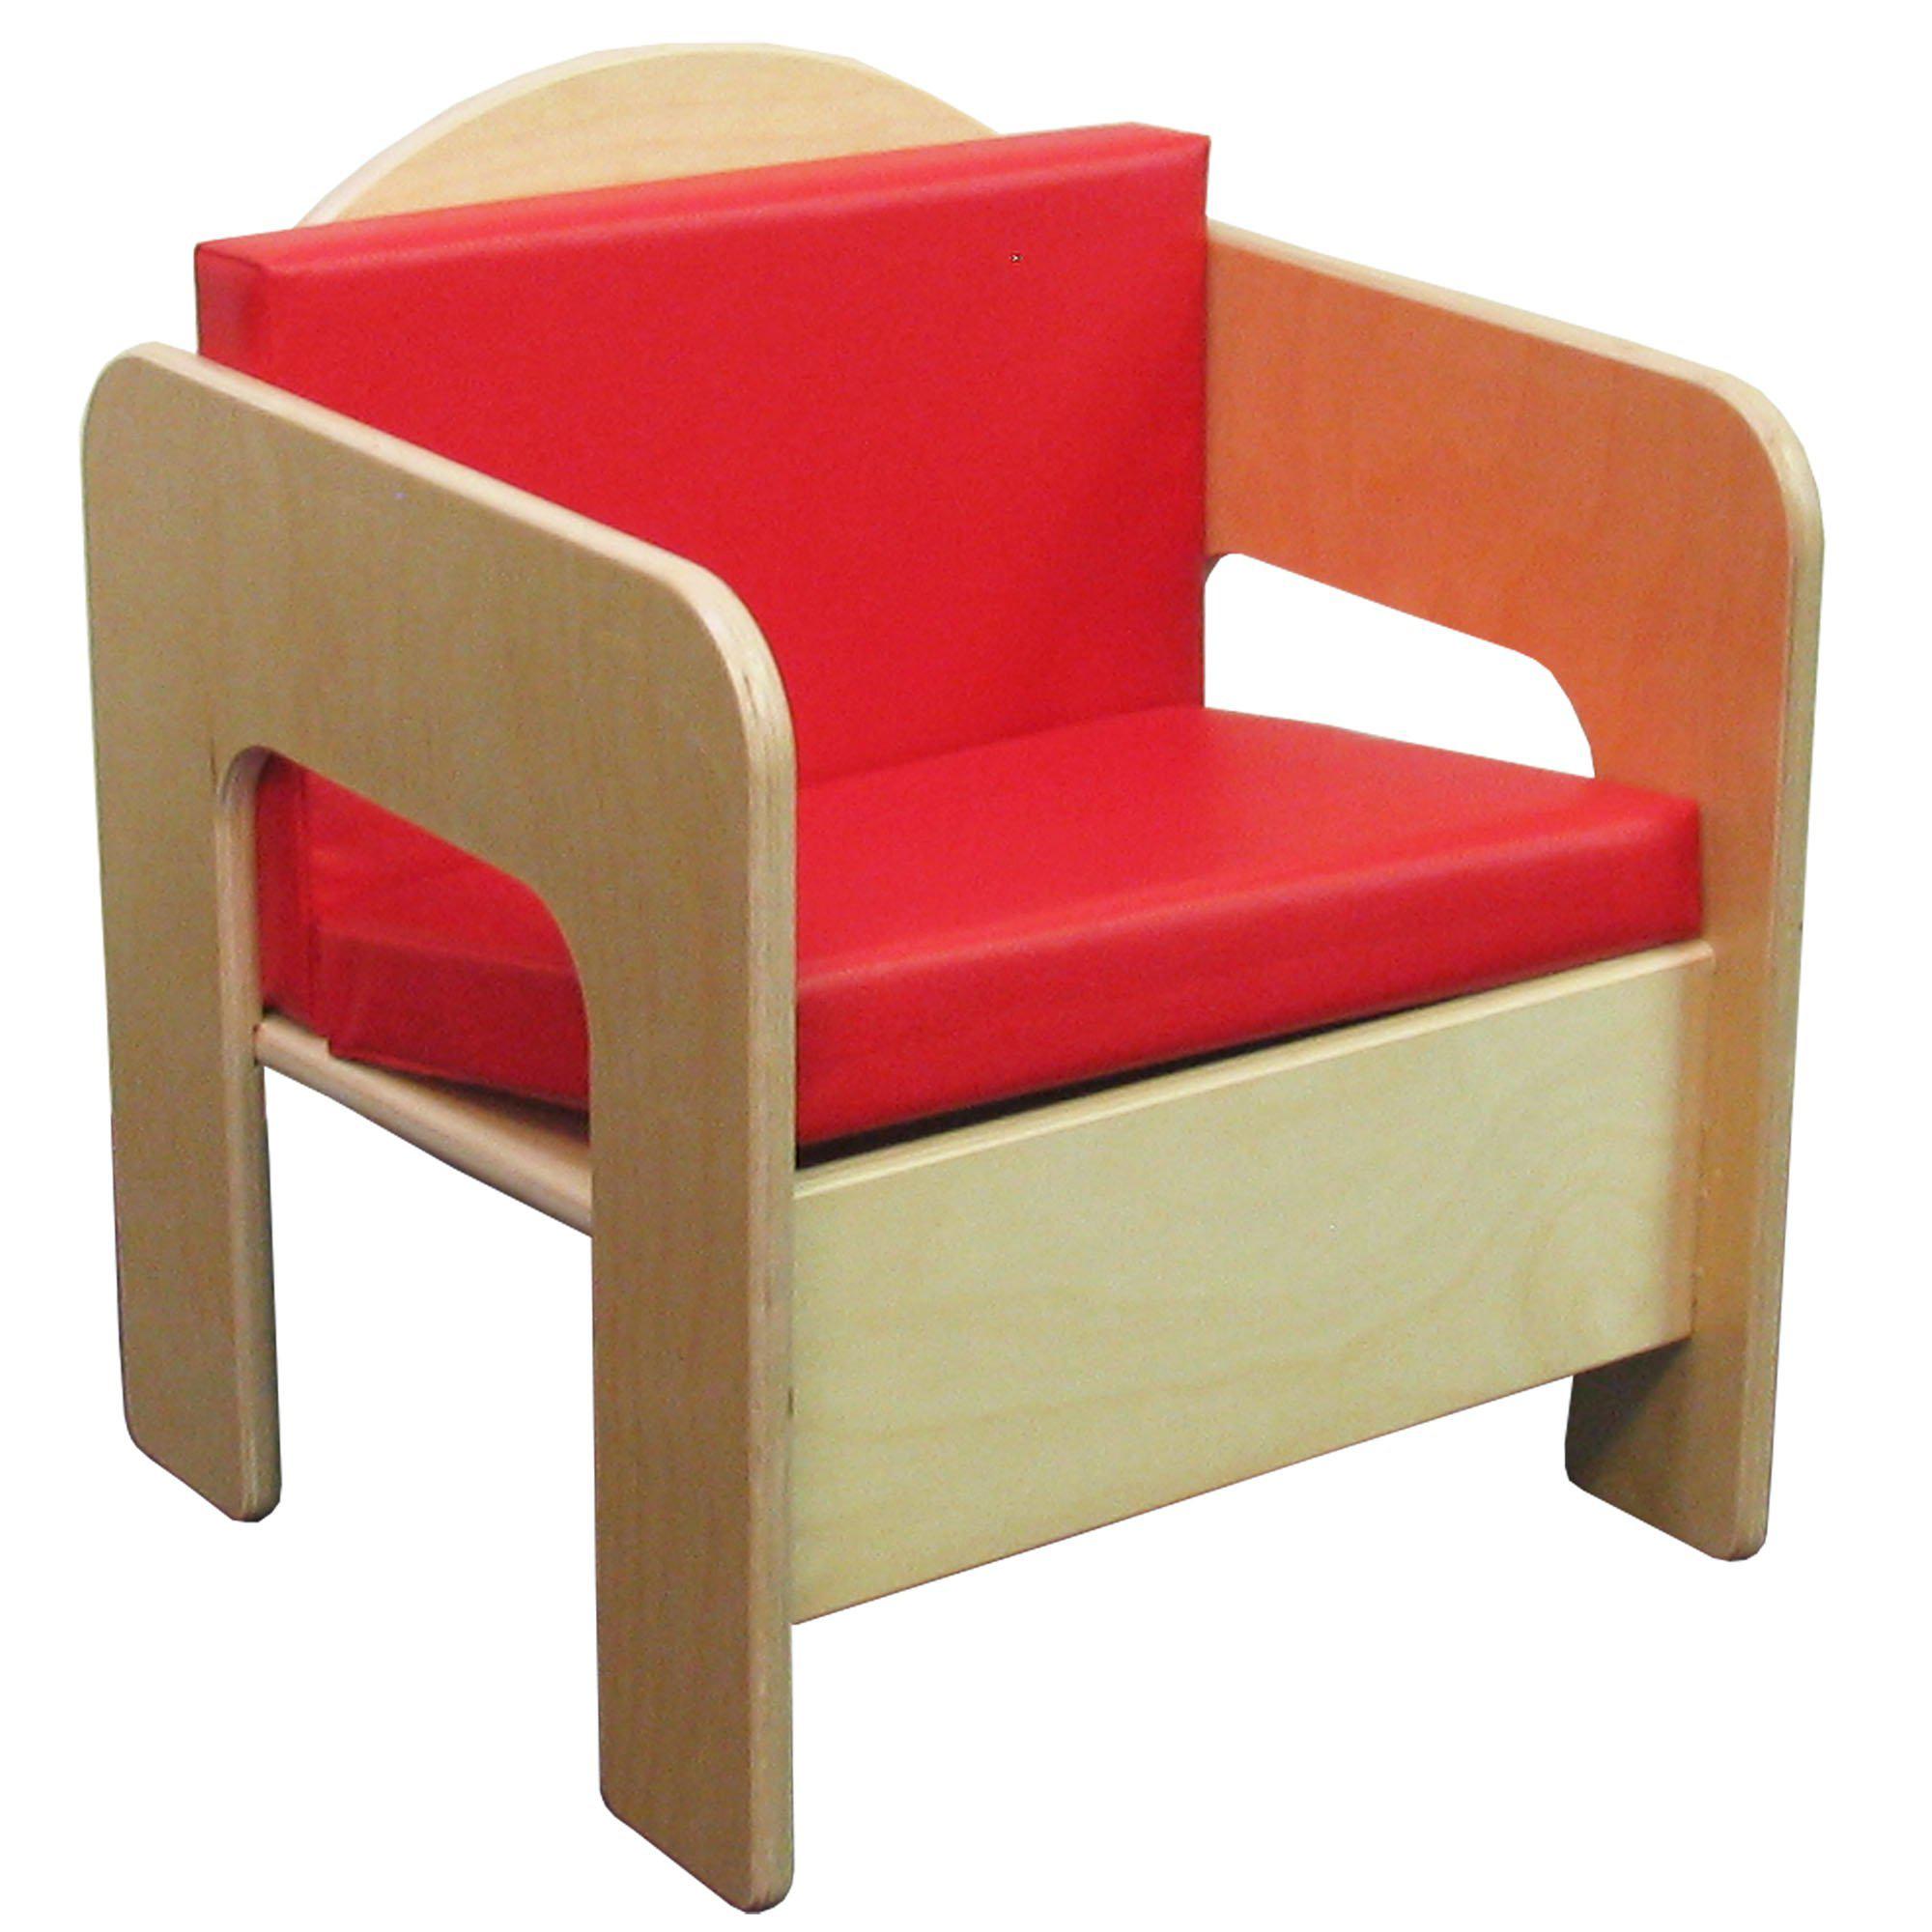 Chair with Red Cushion